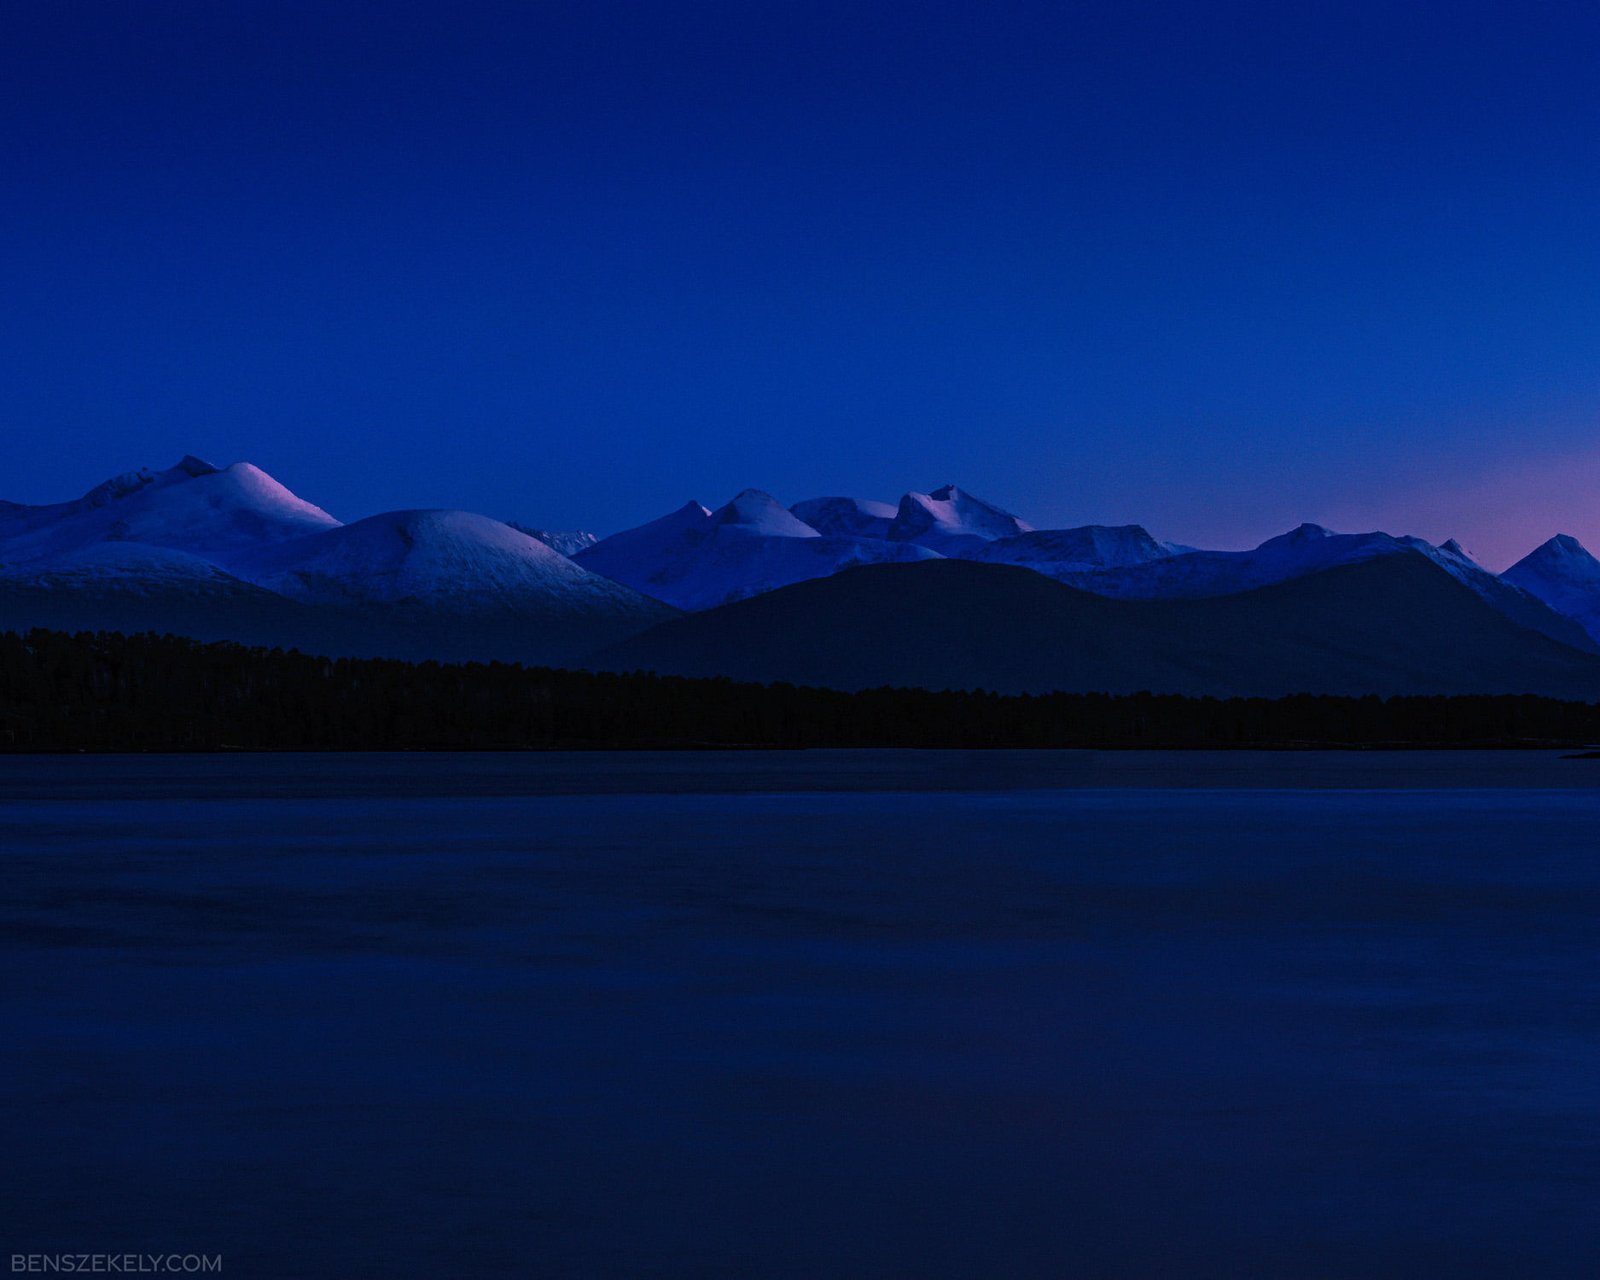 Night photograph of the purple peaks of the Norwegian mountains